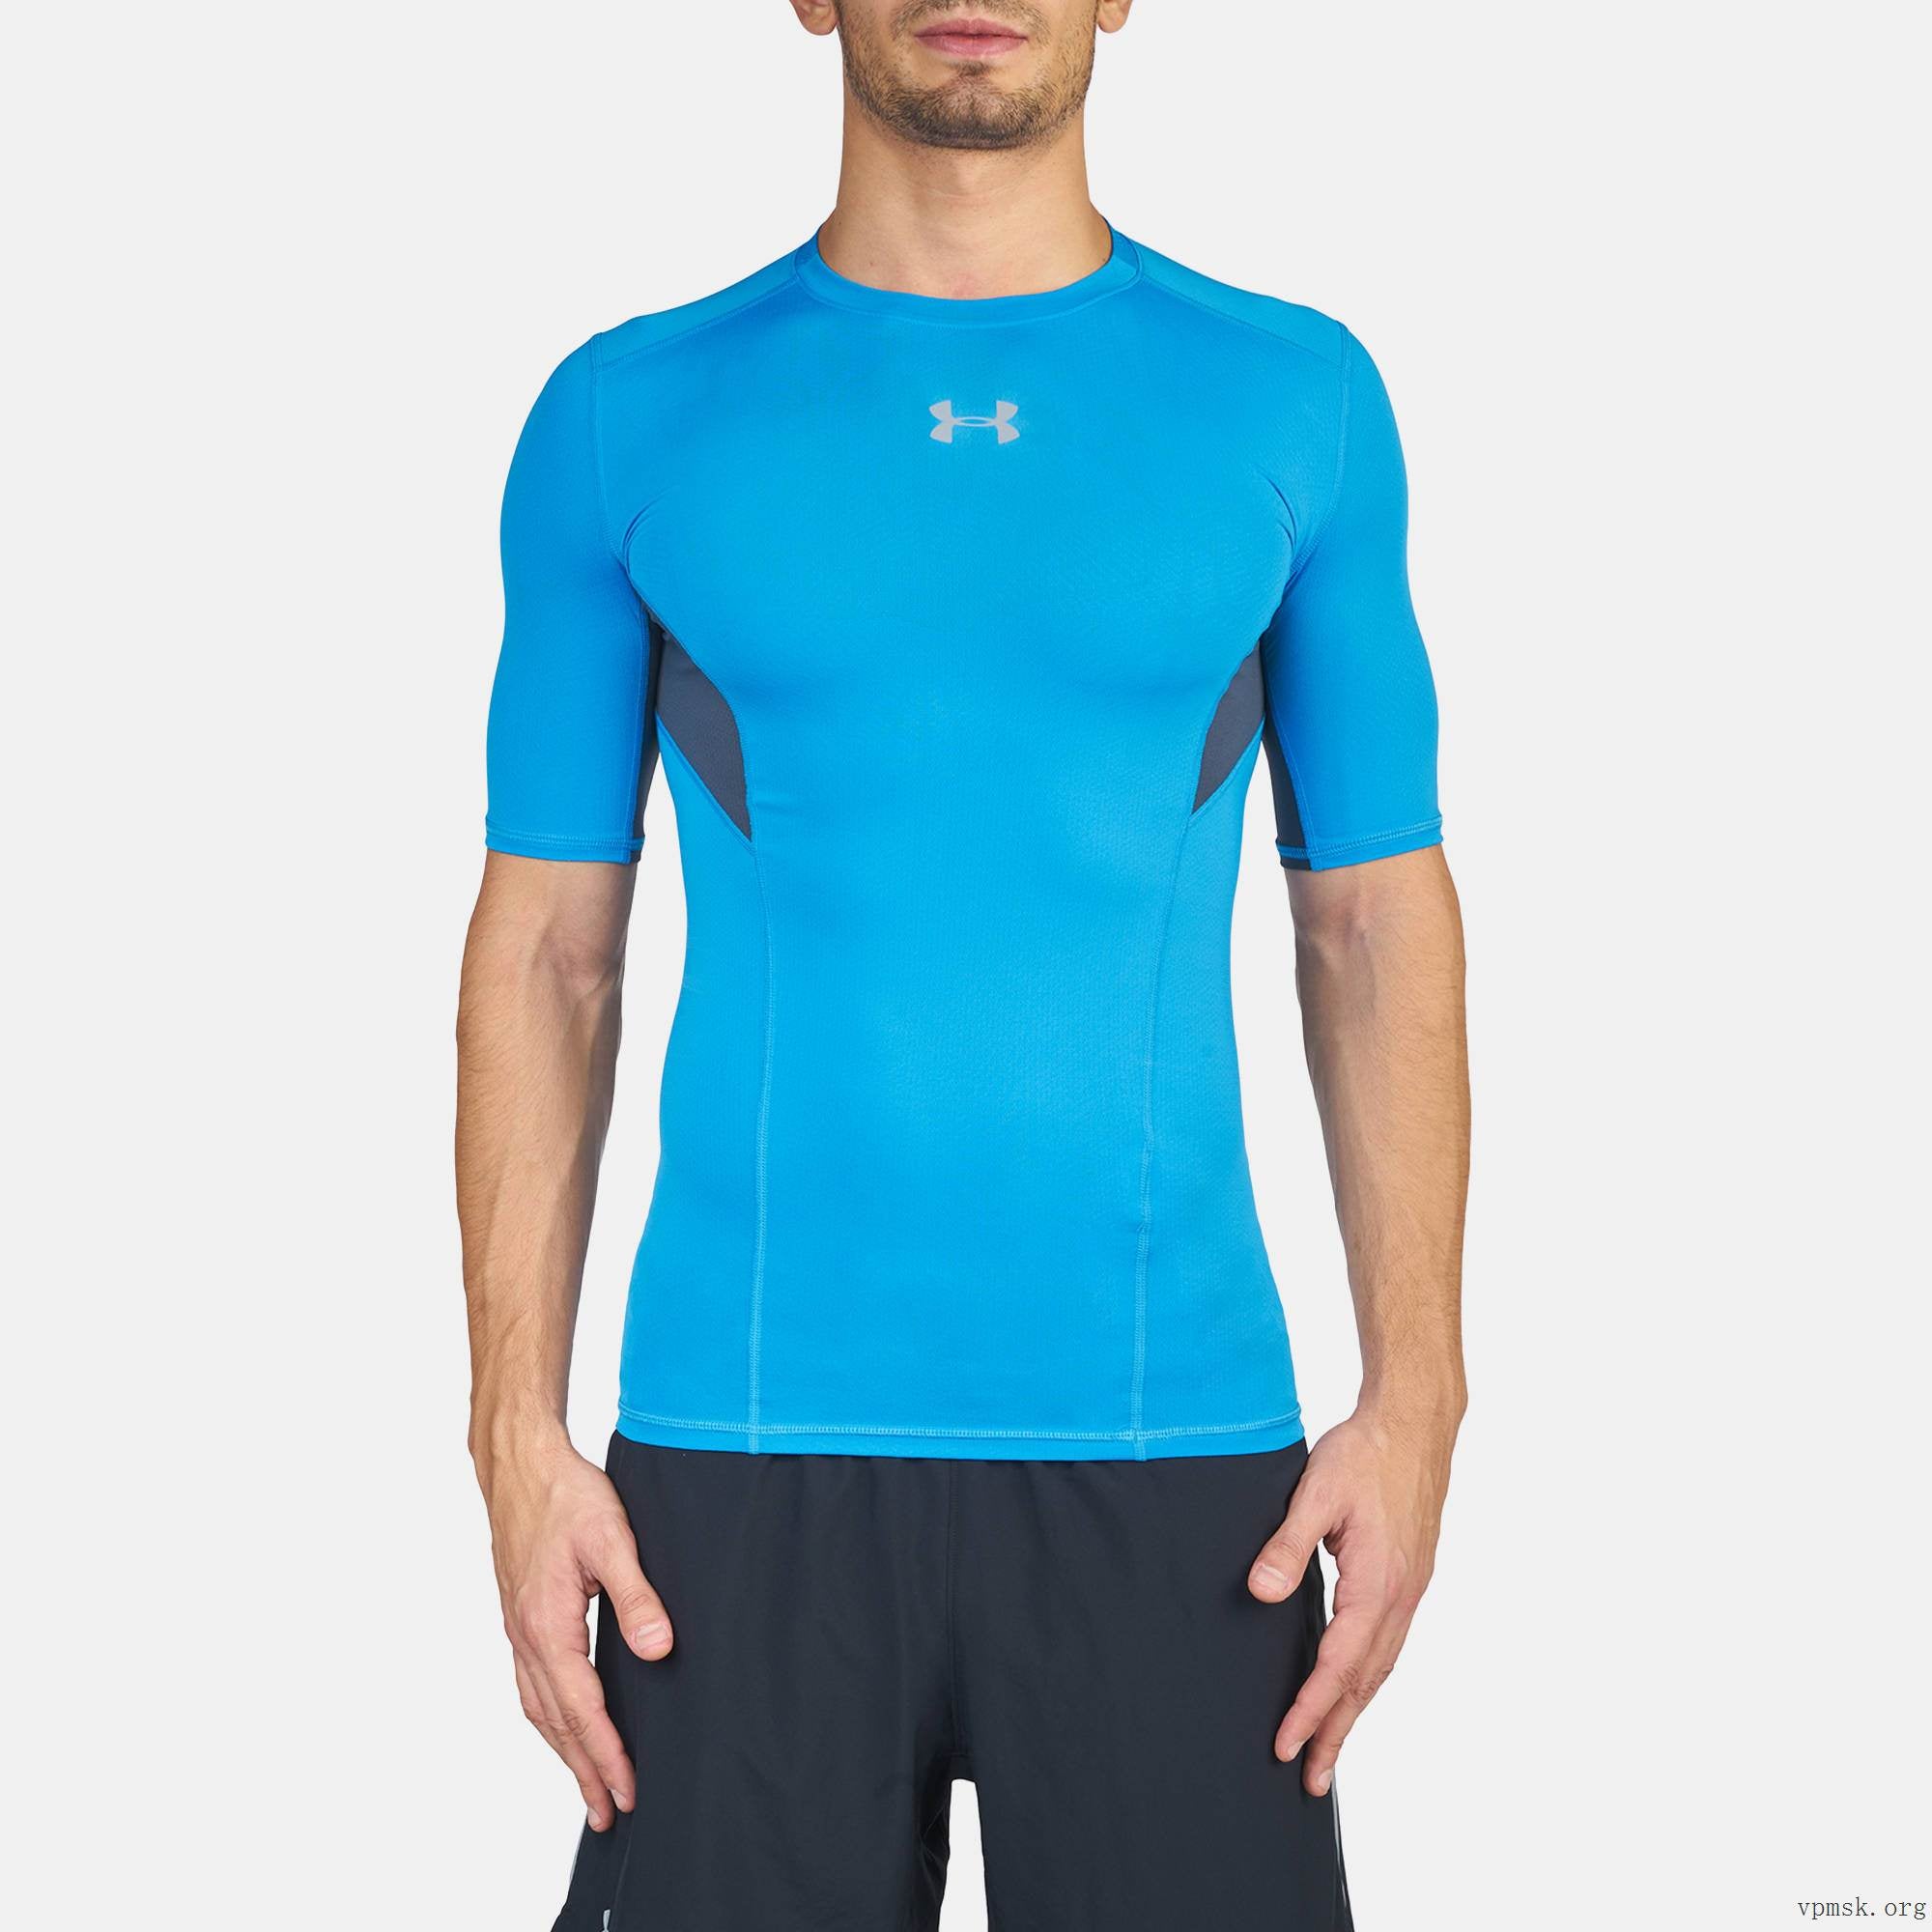 Under armour Hg Compression Short Sleeve T-Shirt Multicolor